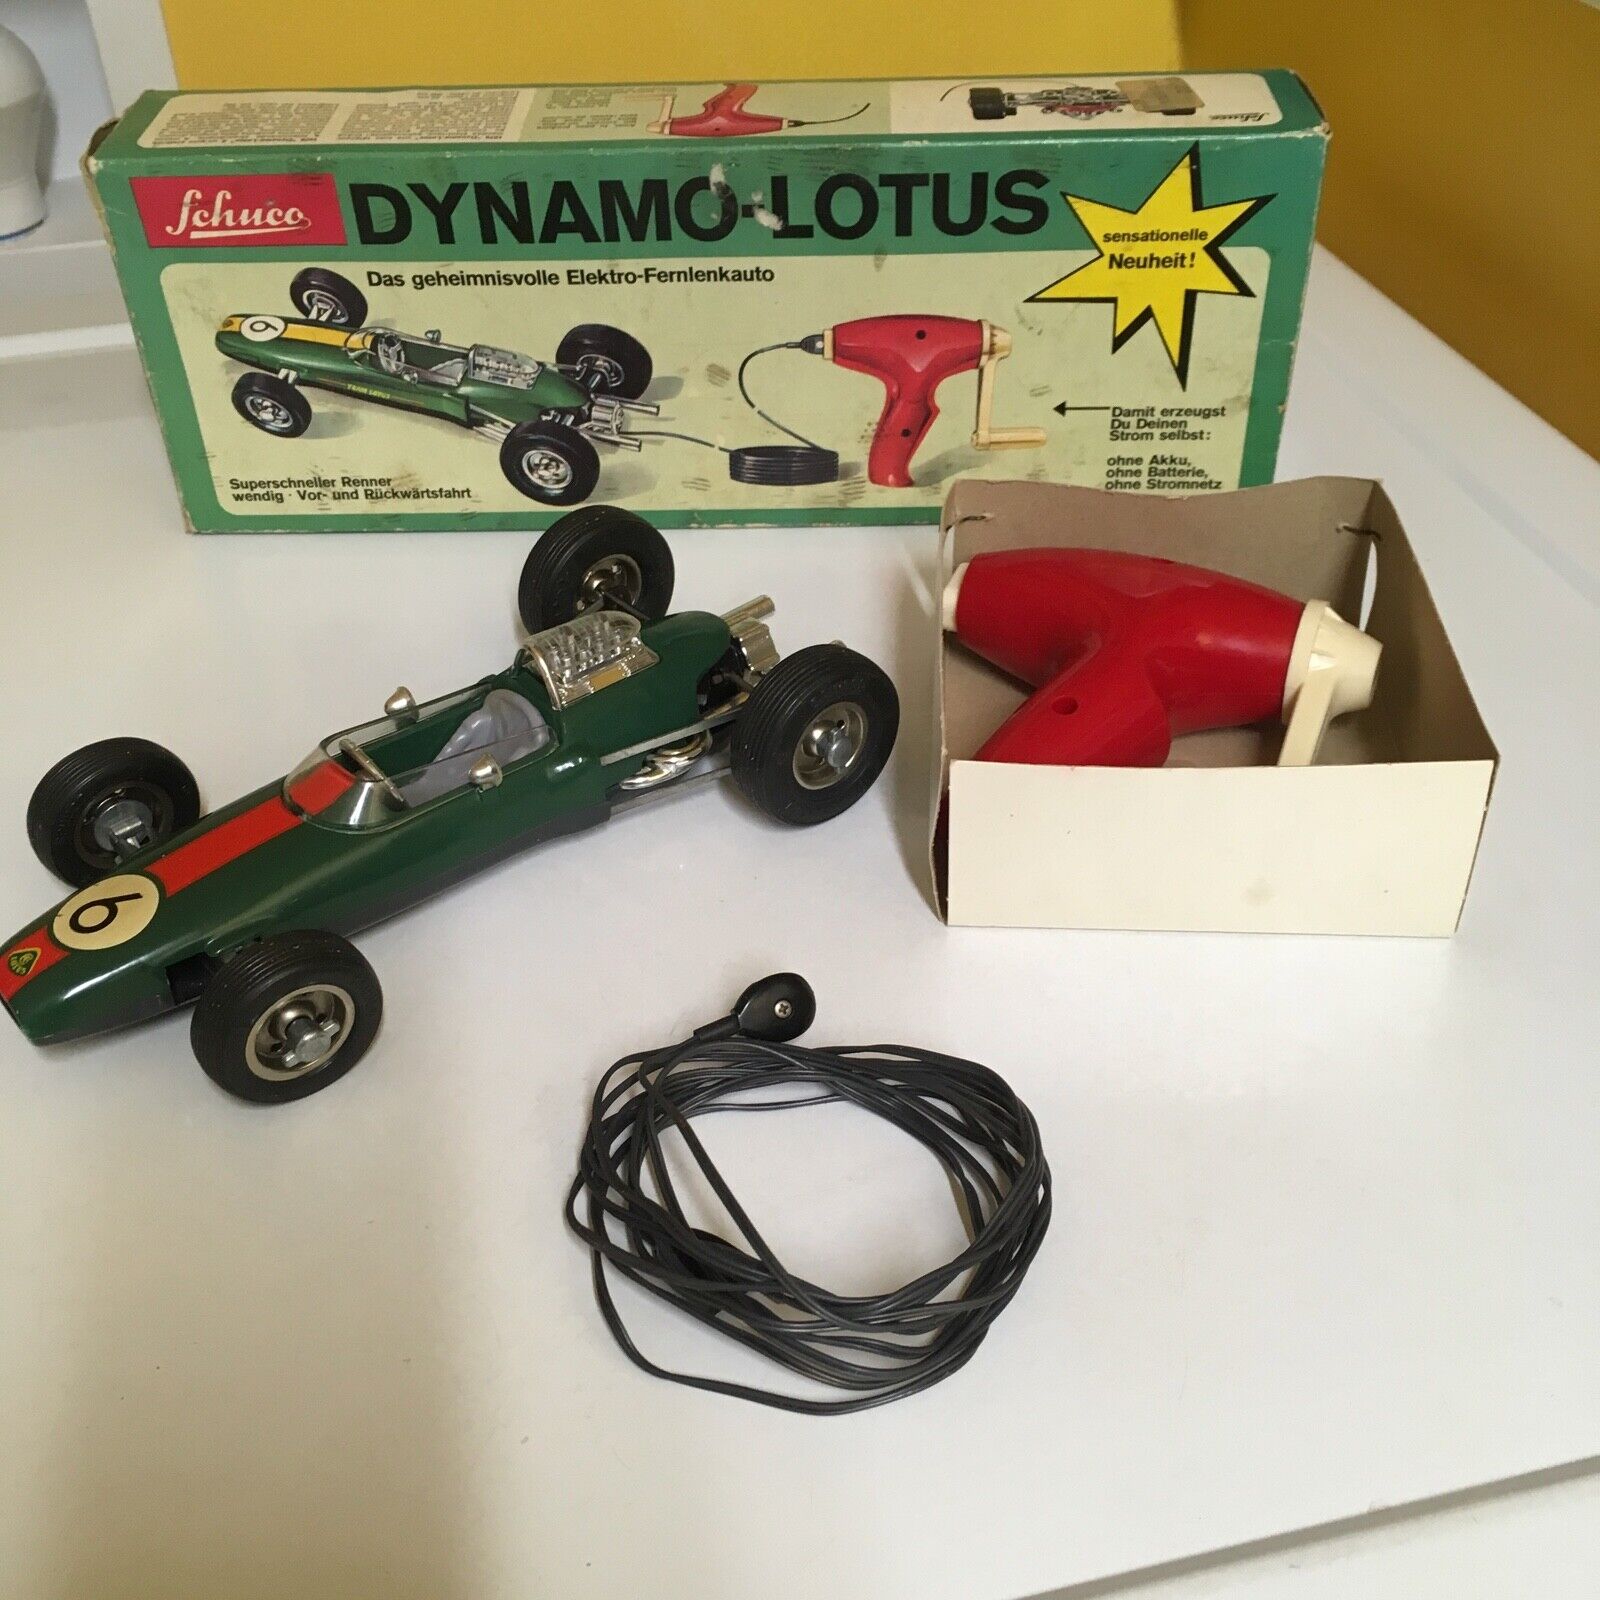 VINTAGE SCHUCO HAND CRANKED/POWERED DYNAMO-LOTUS W/BOX FULLY WORKING ART. 1079